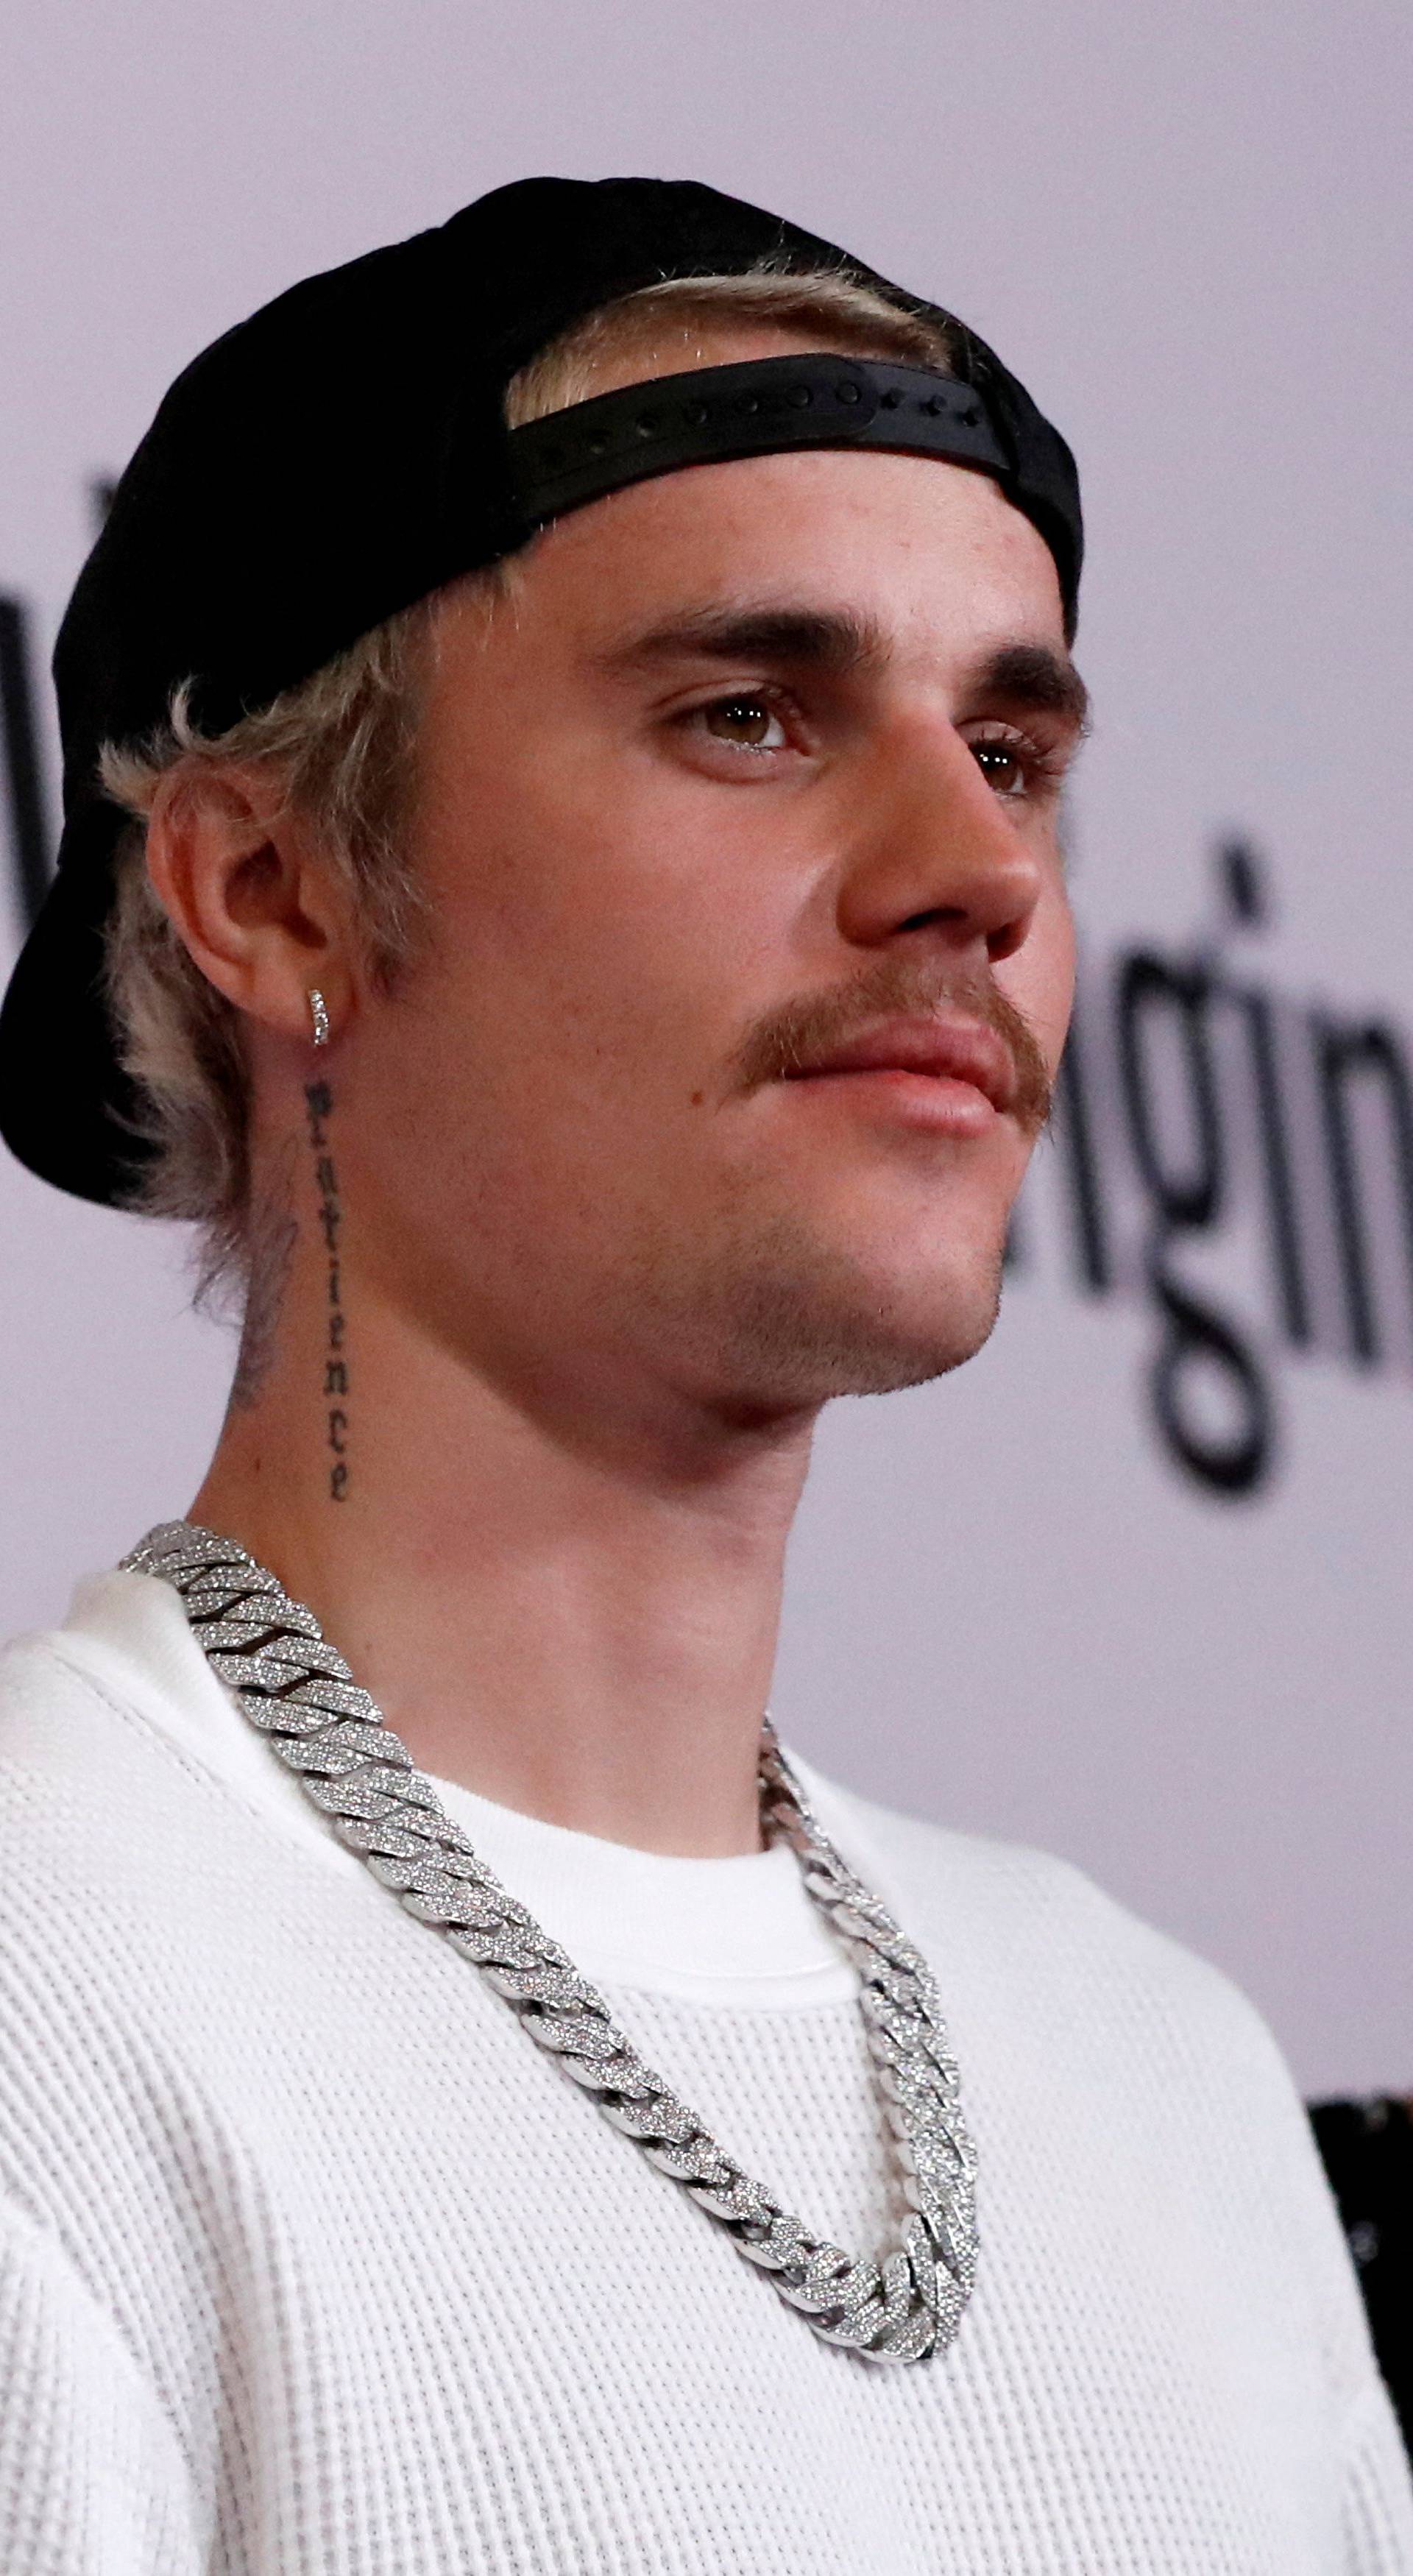 FILE PHOTO: Singer Bieber poses at the premiere for the documentary television series "Justin Bieber: Seasons" in Los Angeles